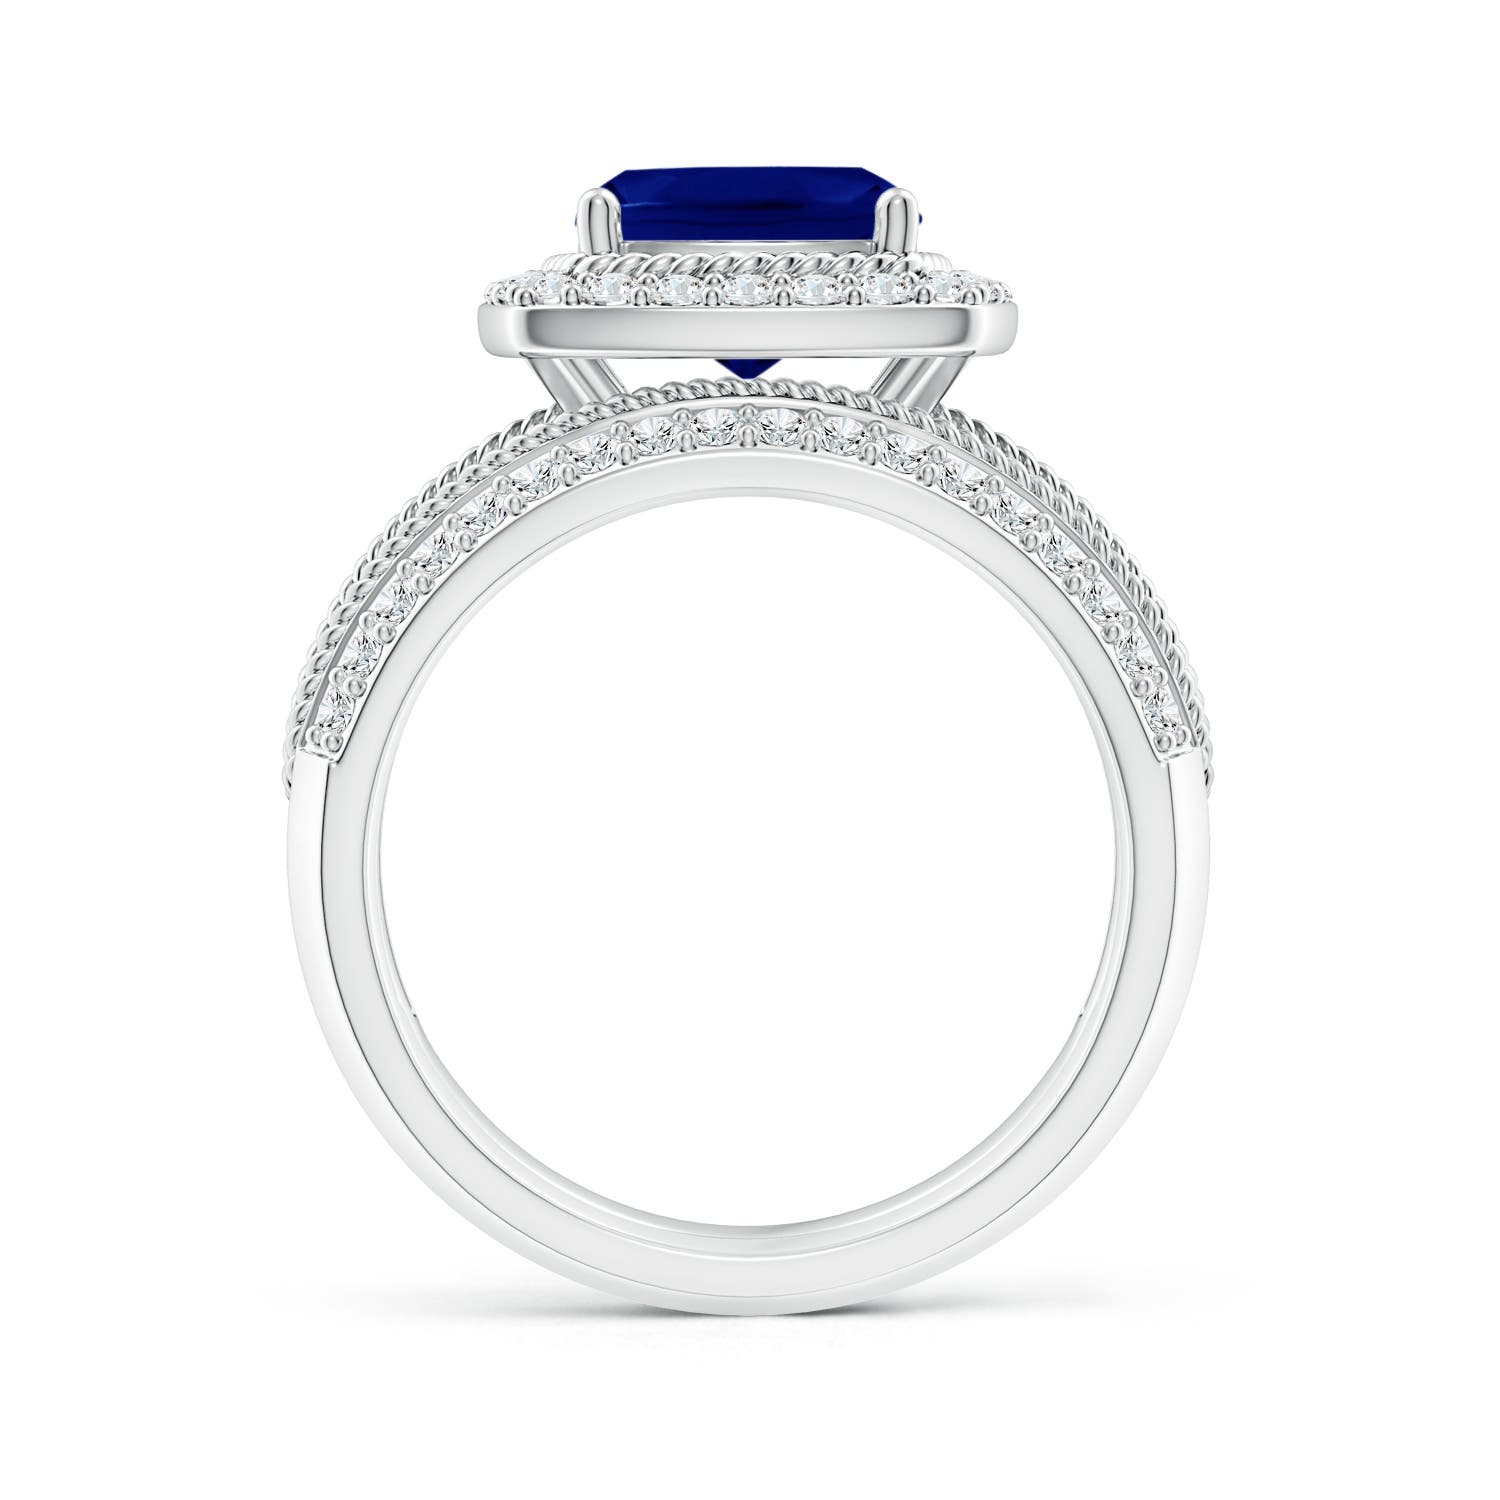 AAA - Blue Sapphire / 3.38 CT / 14 KT White Gold